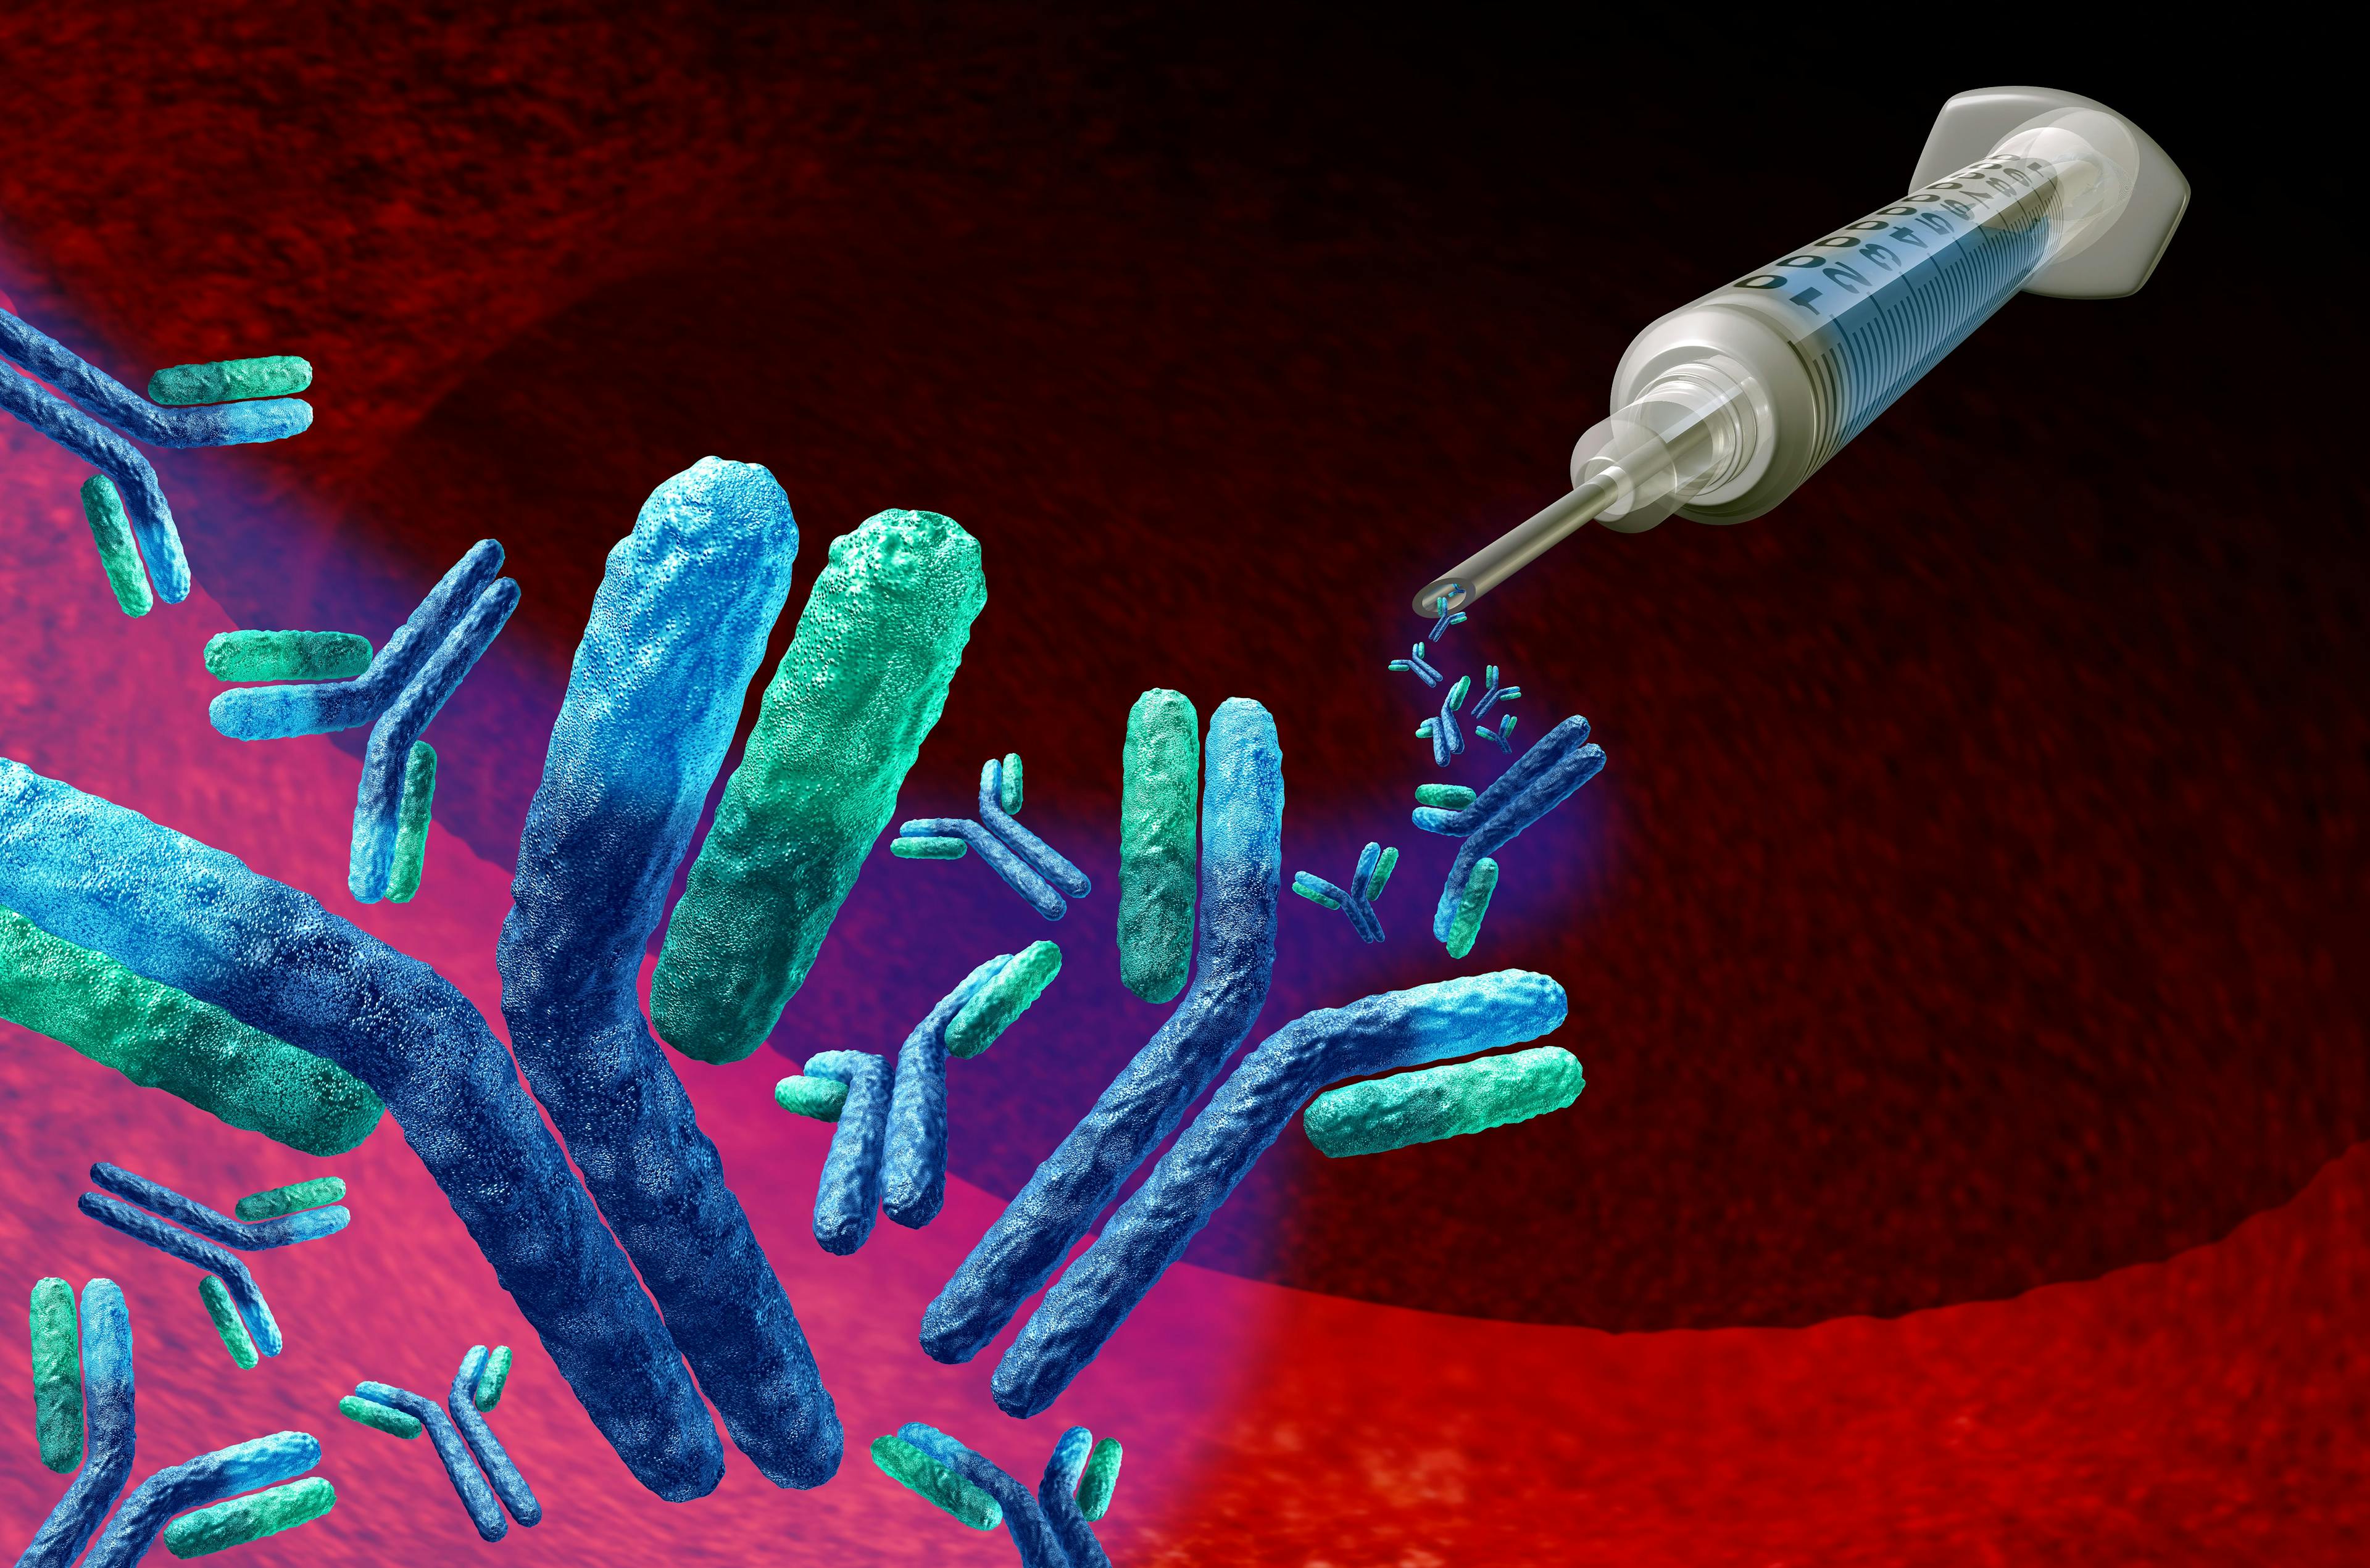 Monoclonal Antibody Treatment and therapies of antibodies as a cure for virus infection as an immune system medical concept for oncology and pathology | Image Credit: © freshidea - stock.adobe.com 